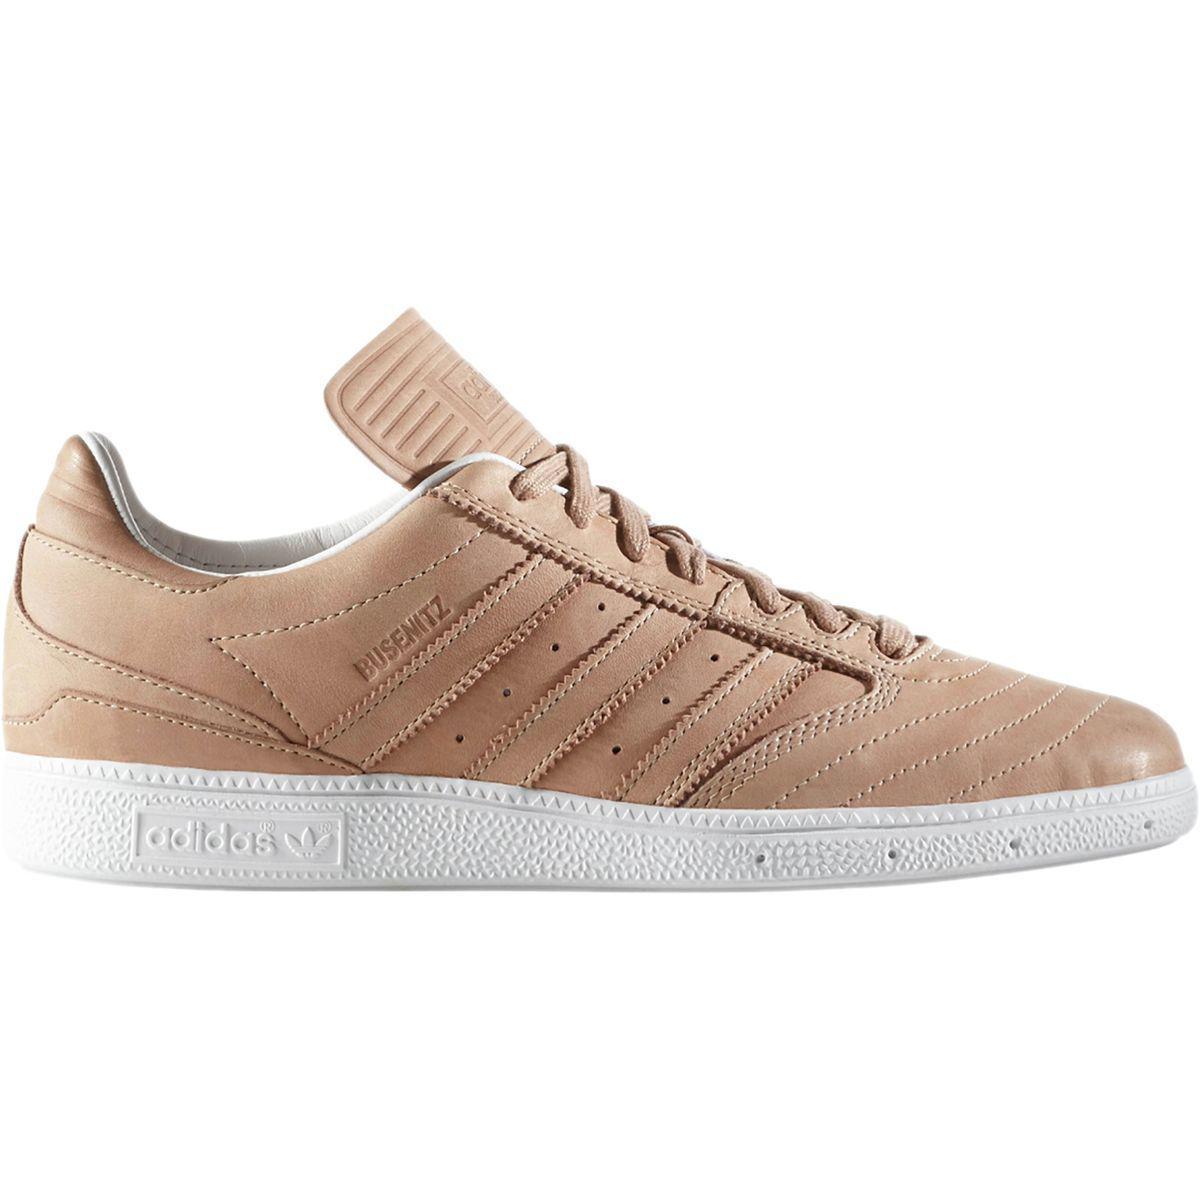 adidas Limited Edition Busenitz Veg Tan Leather Shoe for Men - Lyst